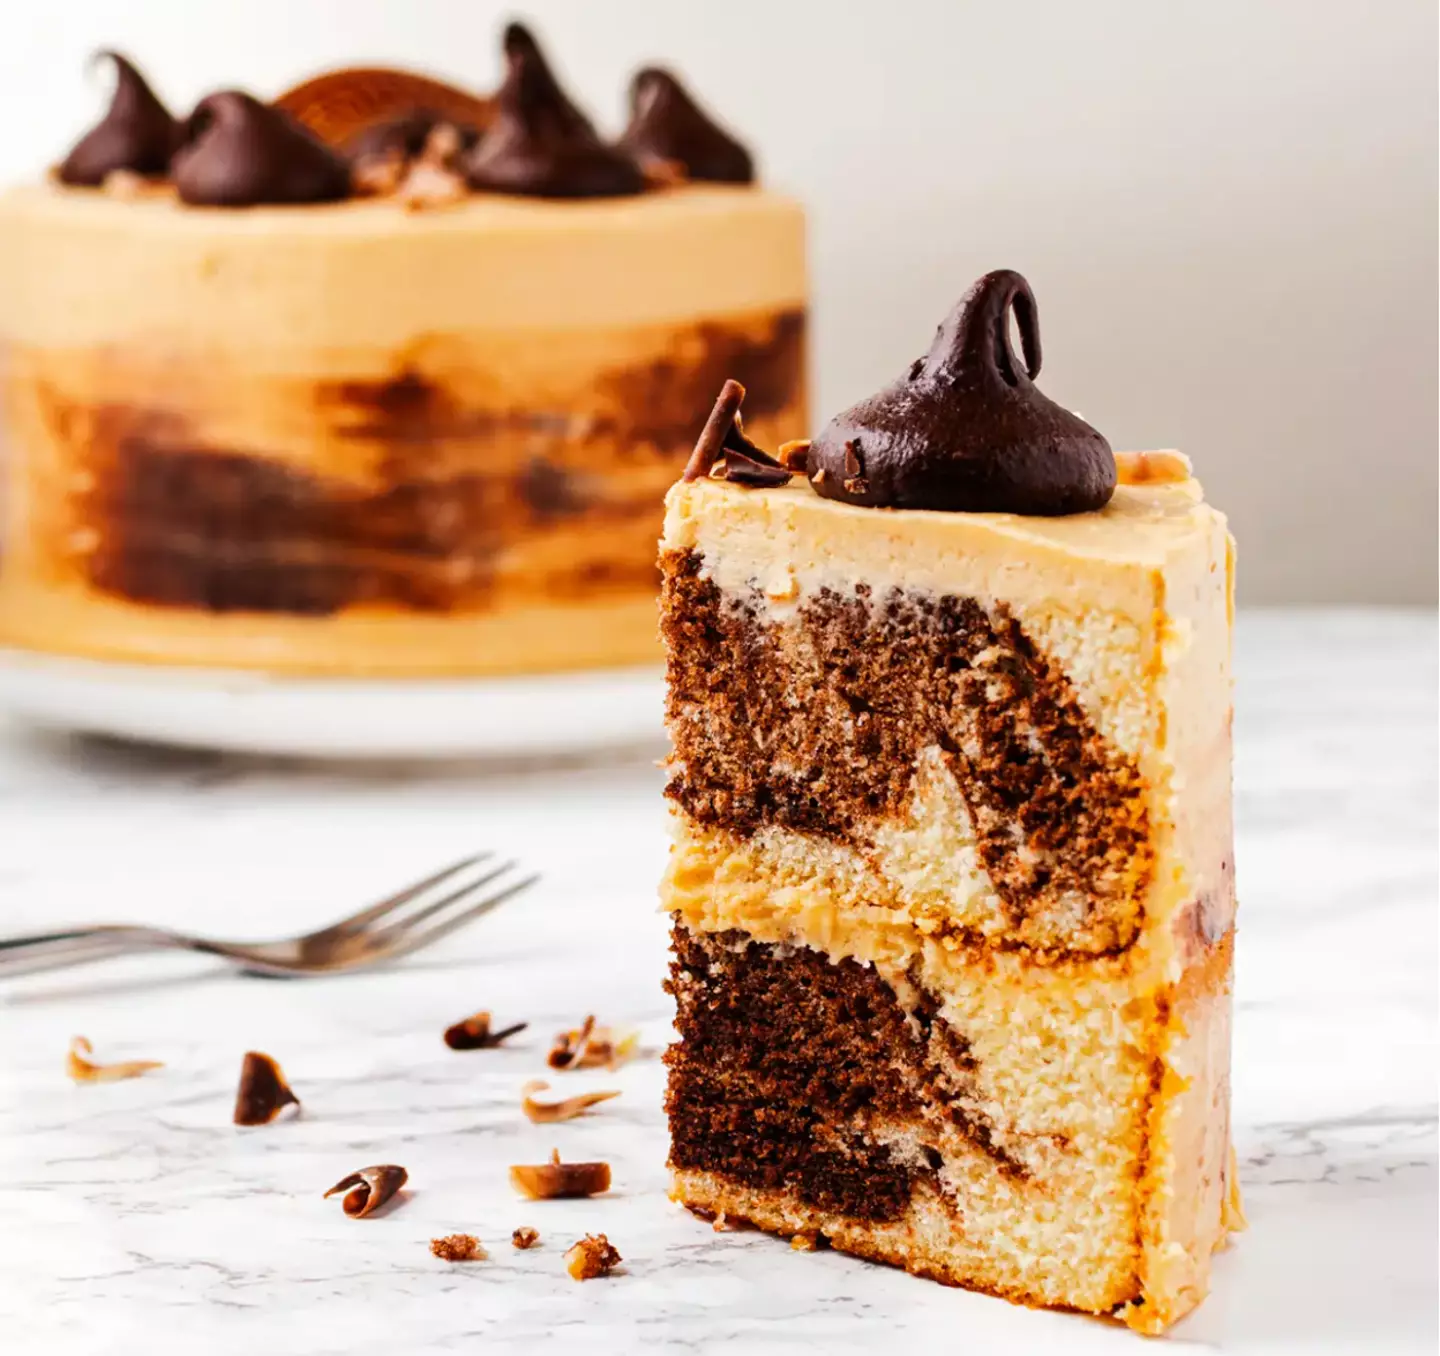 Finsbury Food Group previously created the Baileys marbled cake (